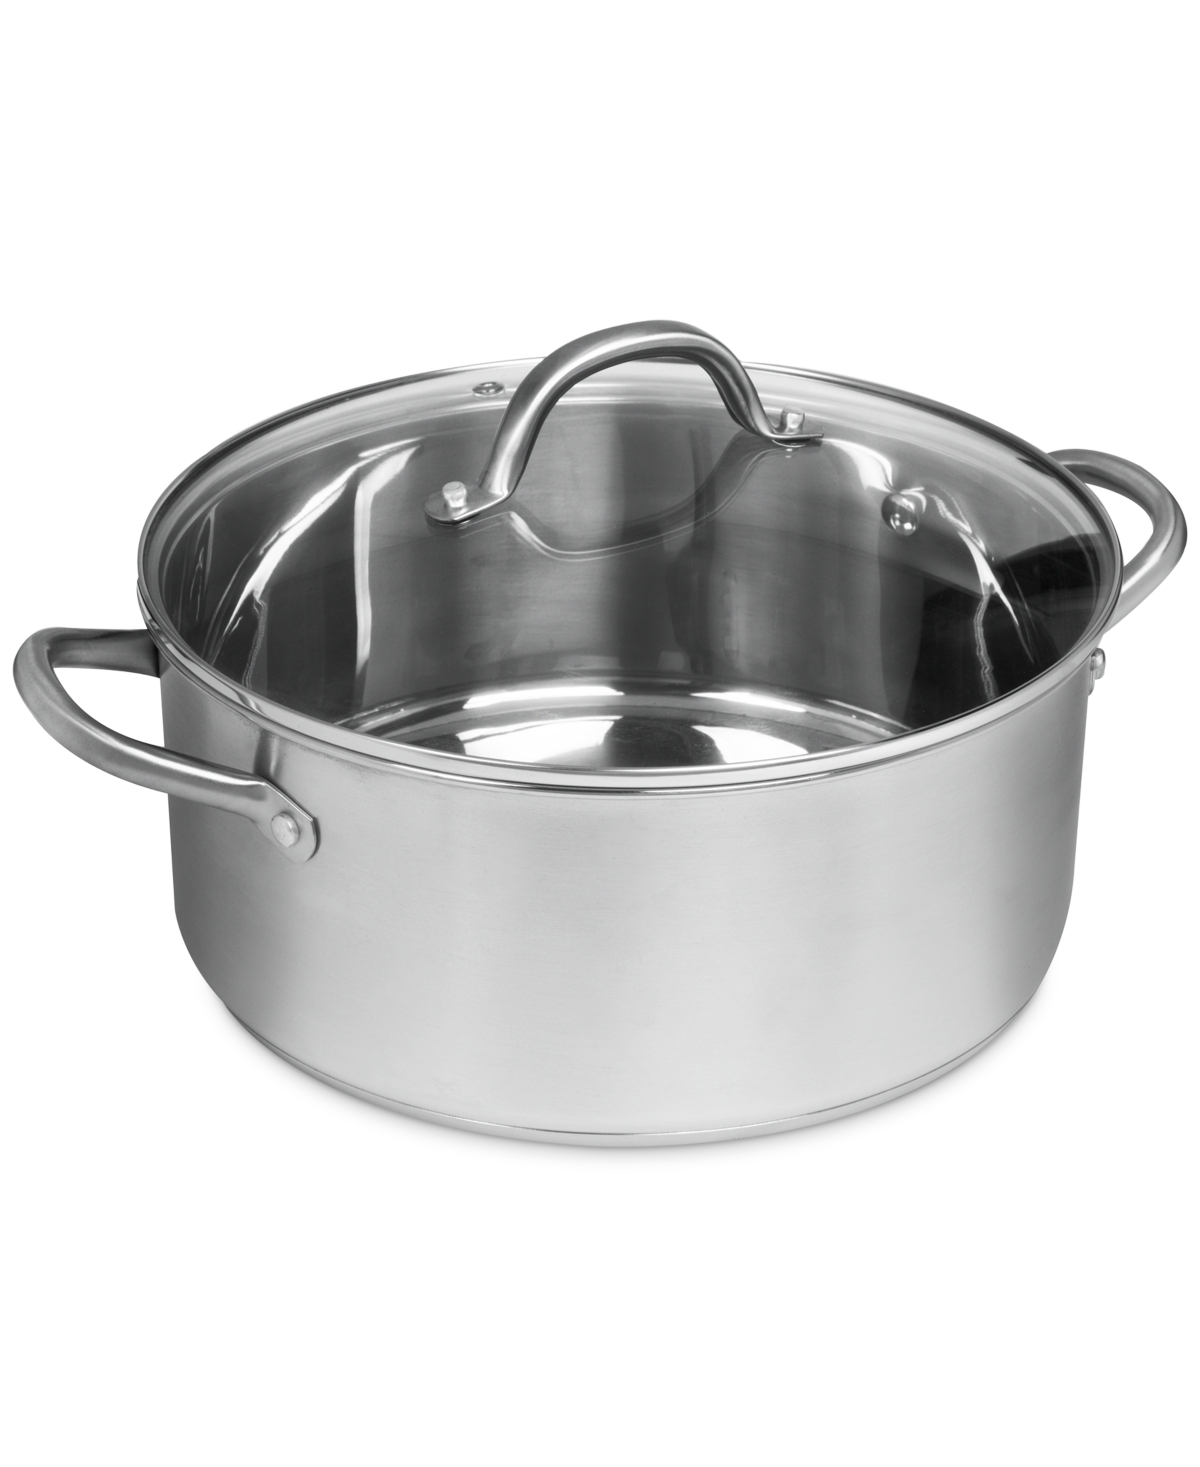 NEW Royal Prestige 5 Ply Stainless 10 1/2” Skillet & 8 Qt Dutch Oven + 1  Lid